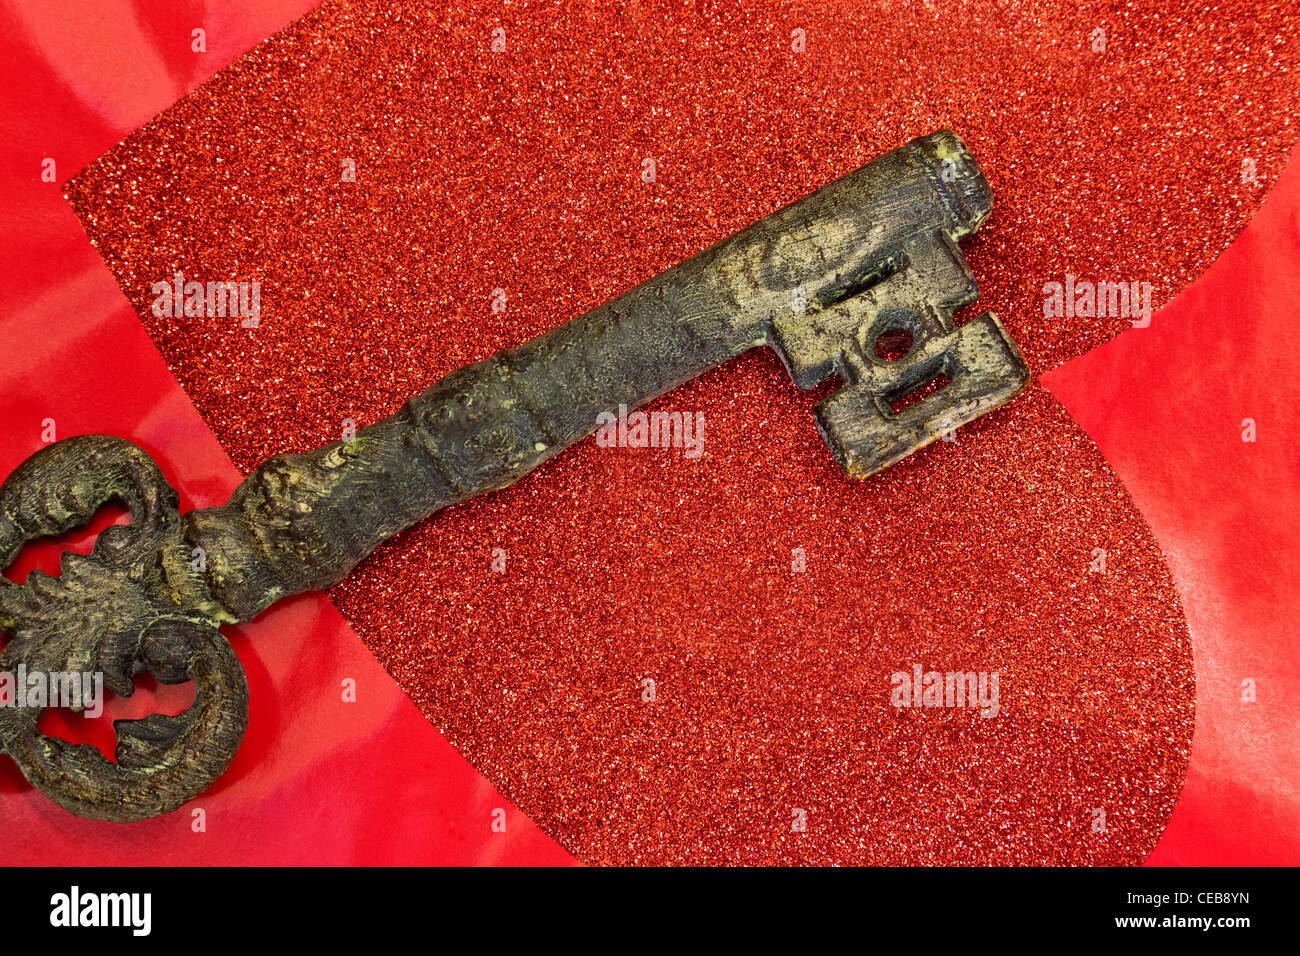 Ornate key placed over red heart. Stock Photo